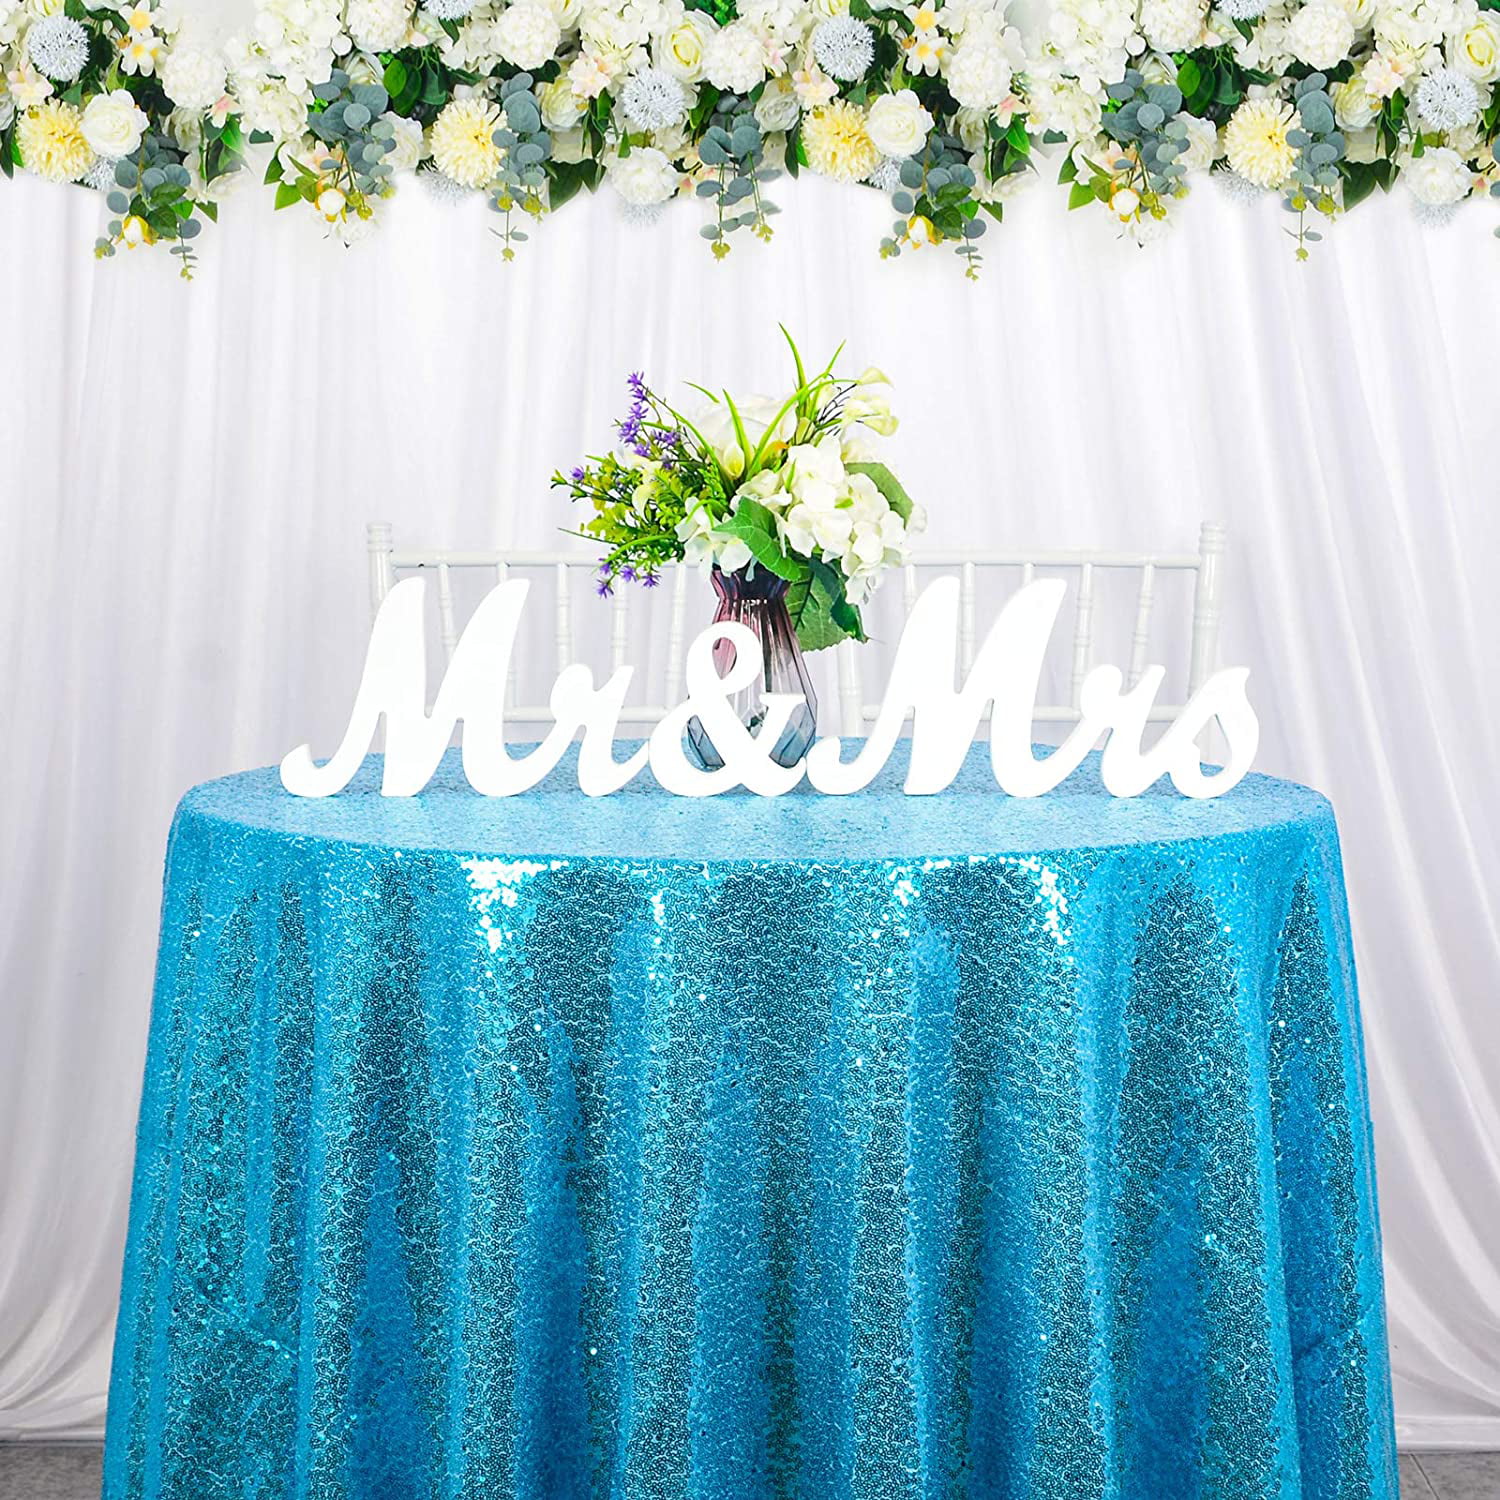 ShinyBeauty Sequin Tablecloth Wedding Party Dinner Decoration 60x102-Inch Orange 